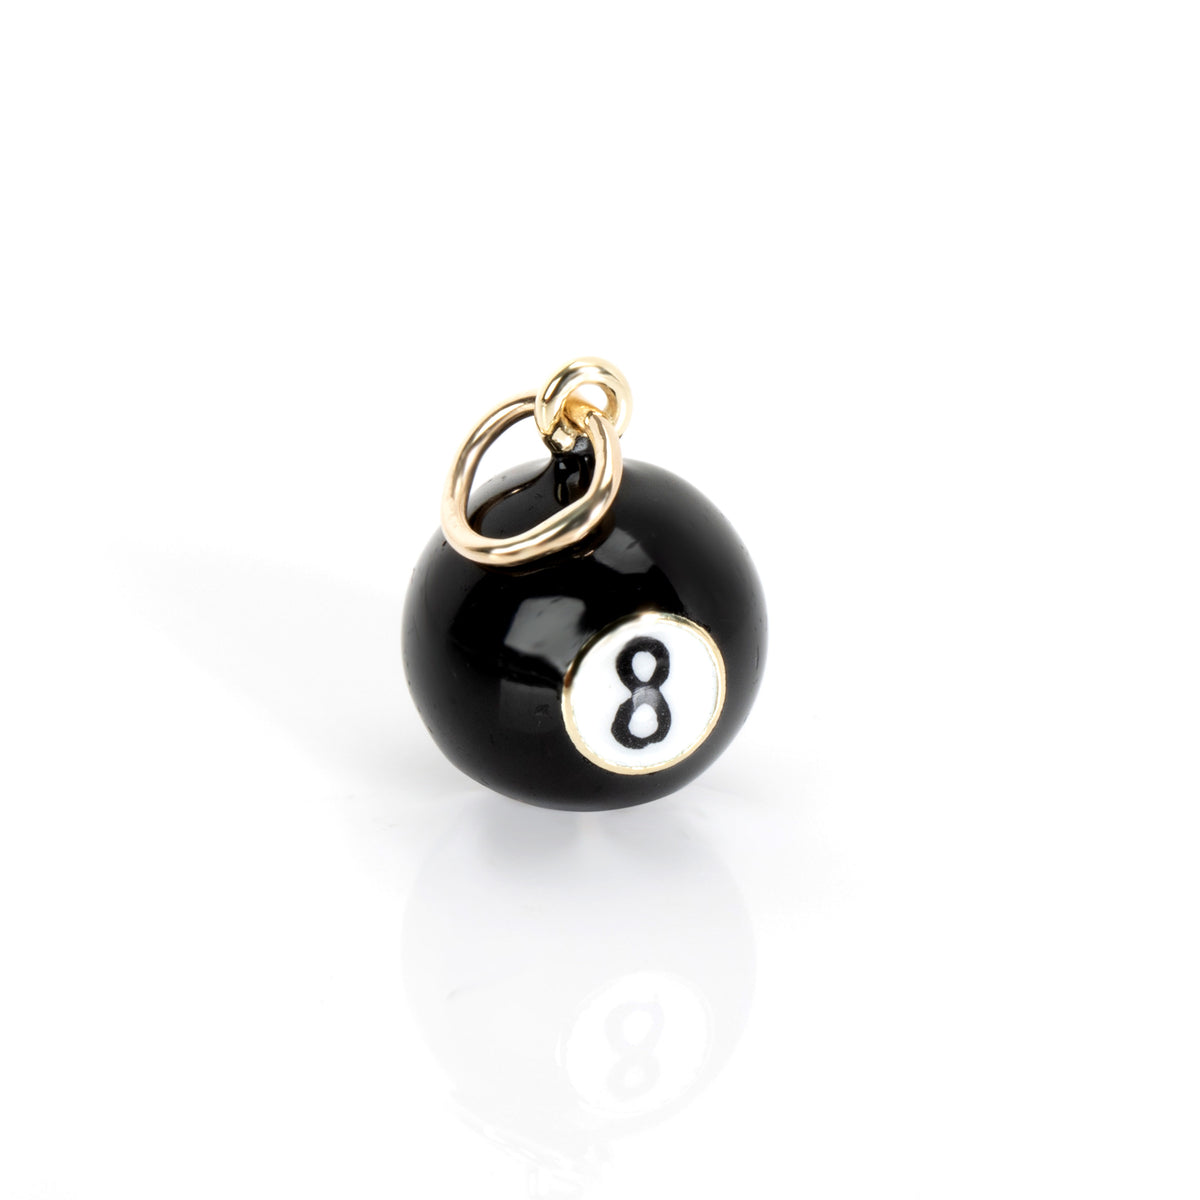 Vintage 8 Ball Charm in 14K Yellow Gold